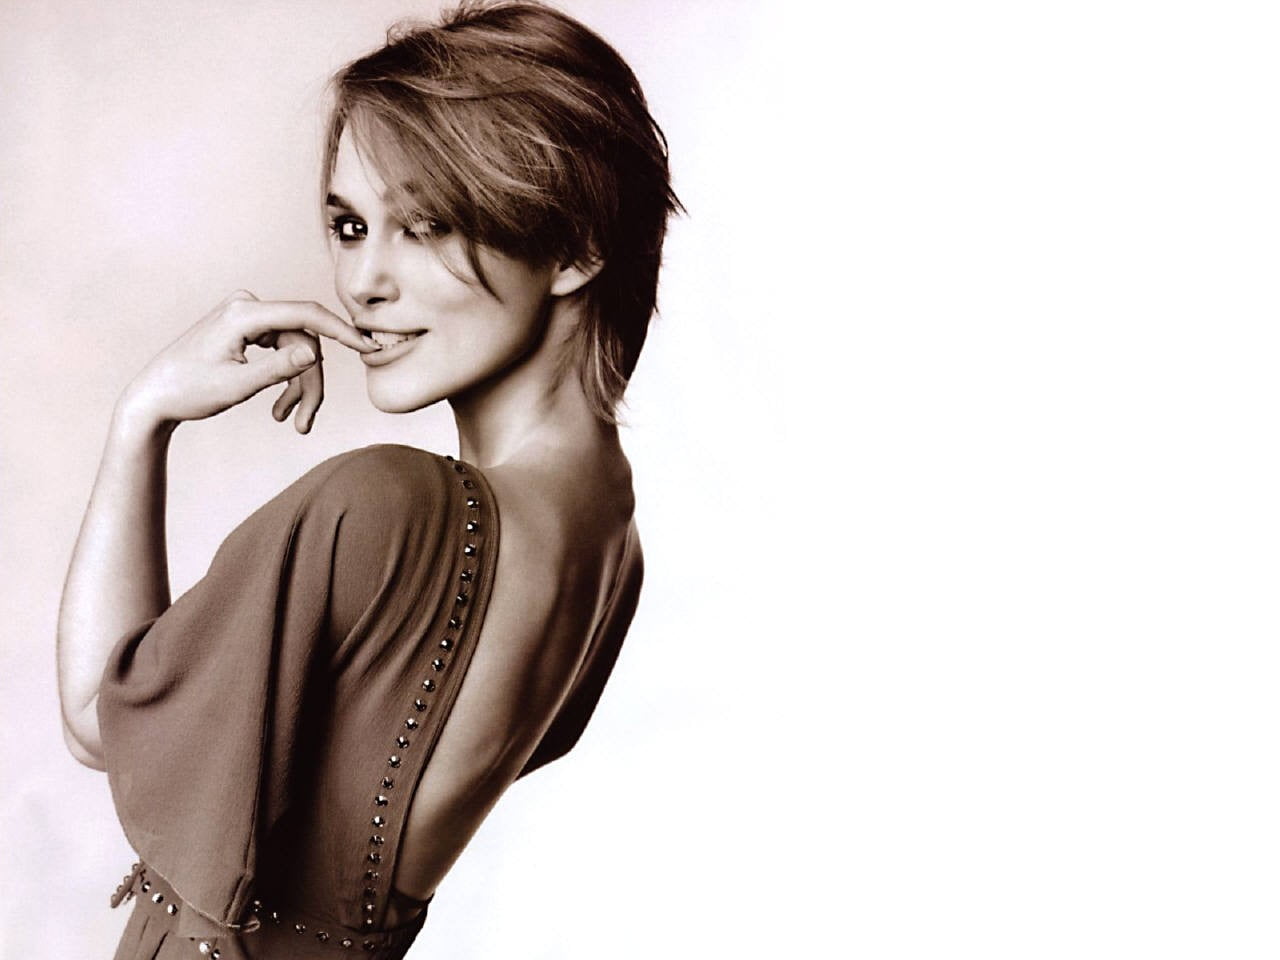 Keira Knightley, women, actress, sepia, one person, young adult